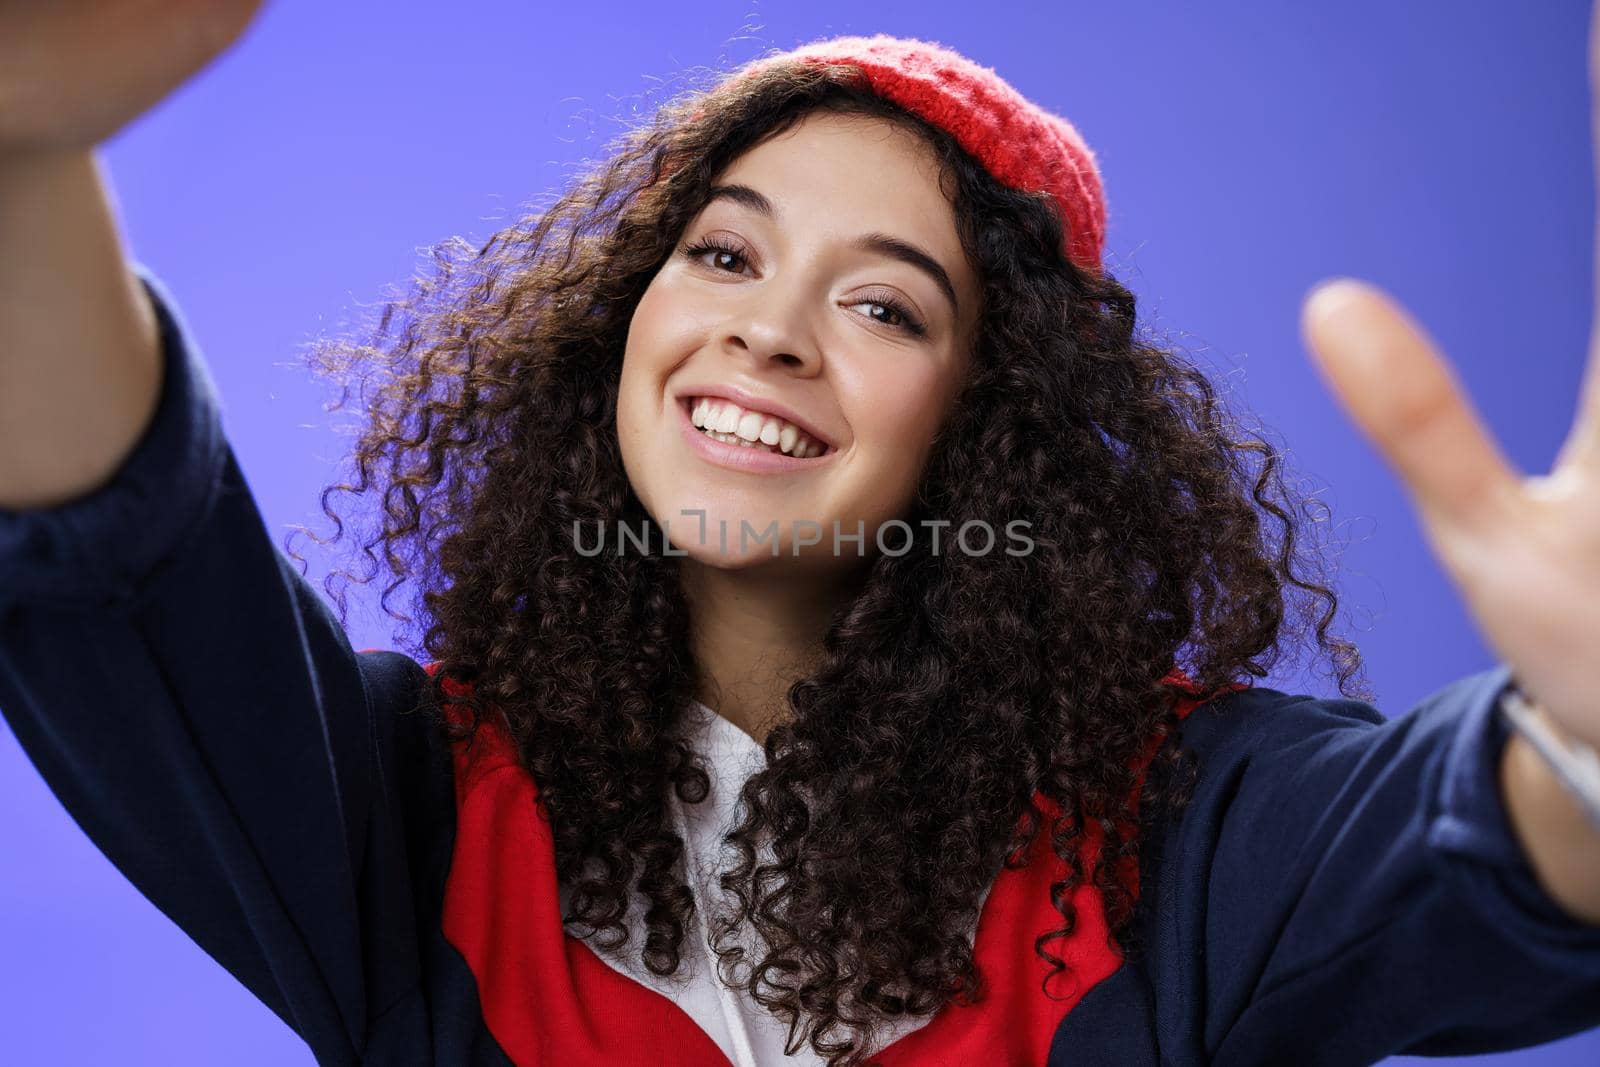 Cool and stylish friendly-looking energized happy woman in 20s with curly hair wearing warm beanie and outdoor clothes tilting head holding camera as taking selfie, smiling over blue wall.